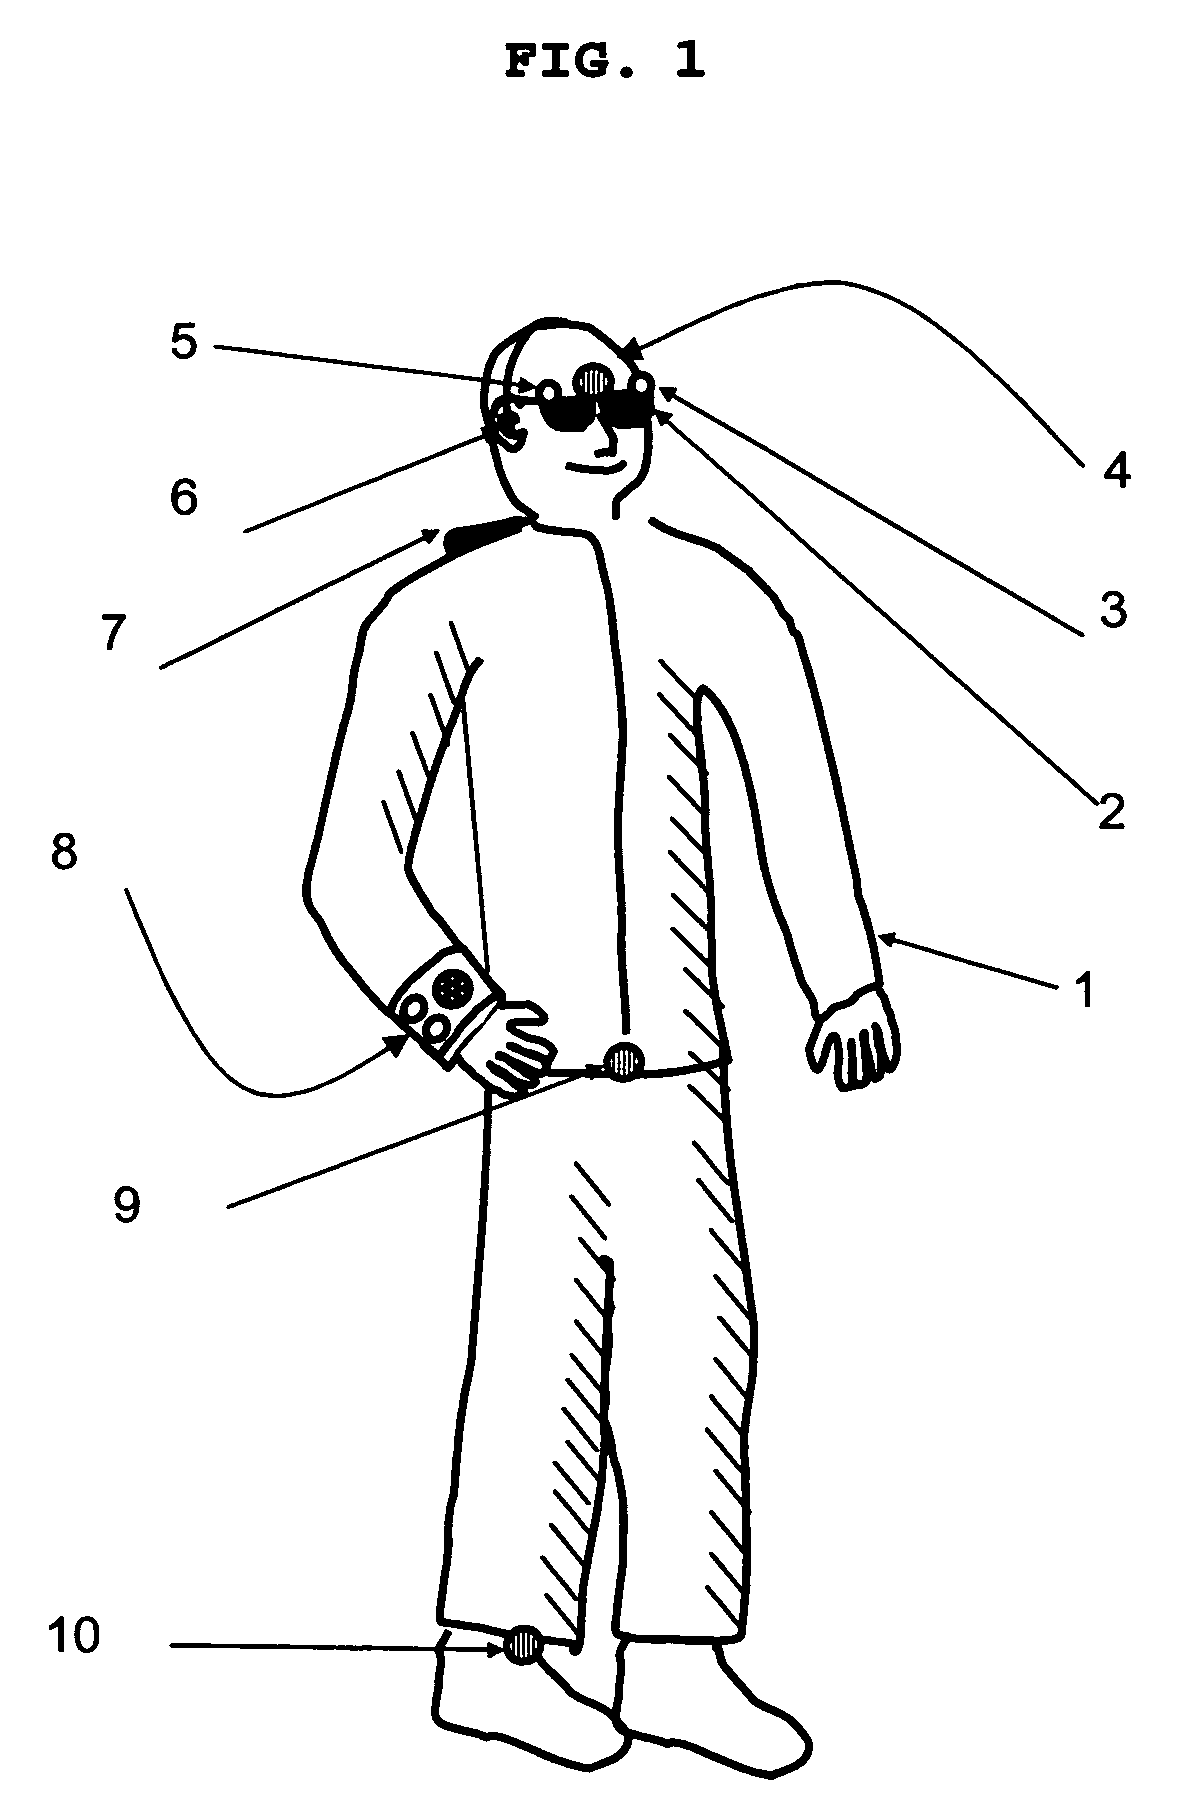 System for seeing using auditory feedback